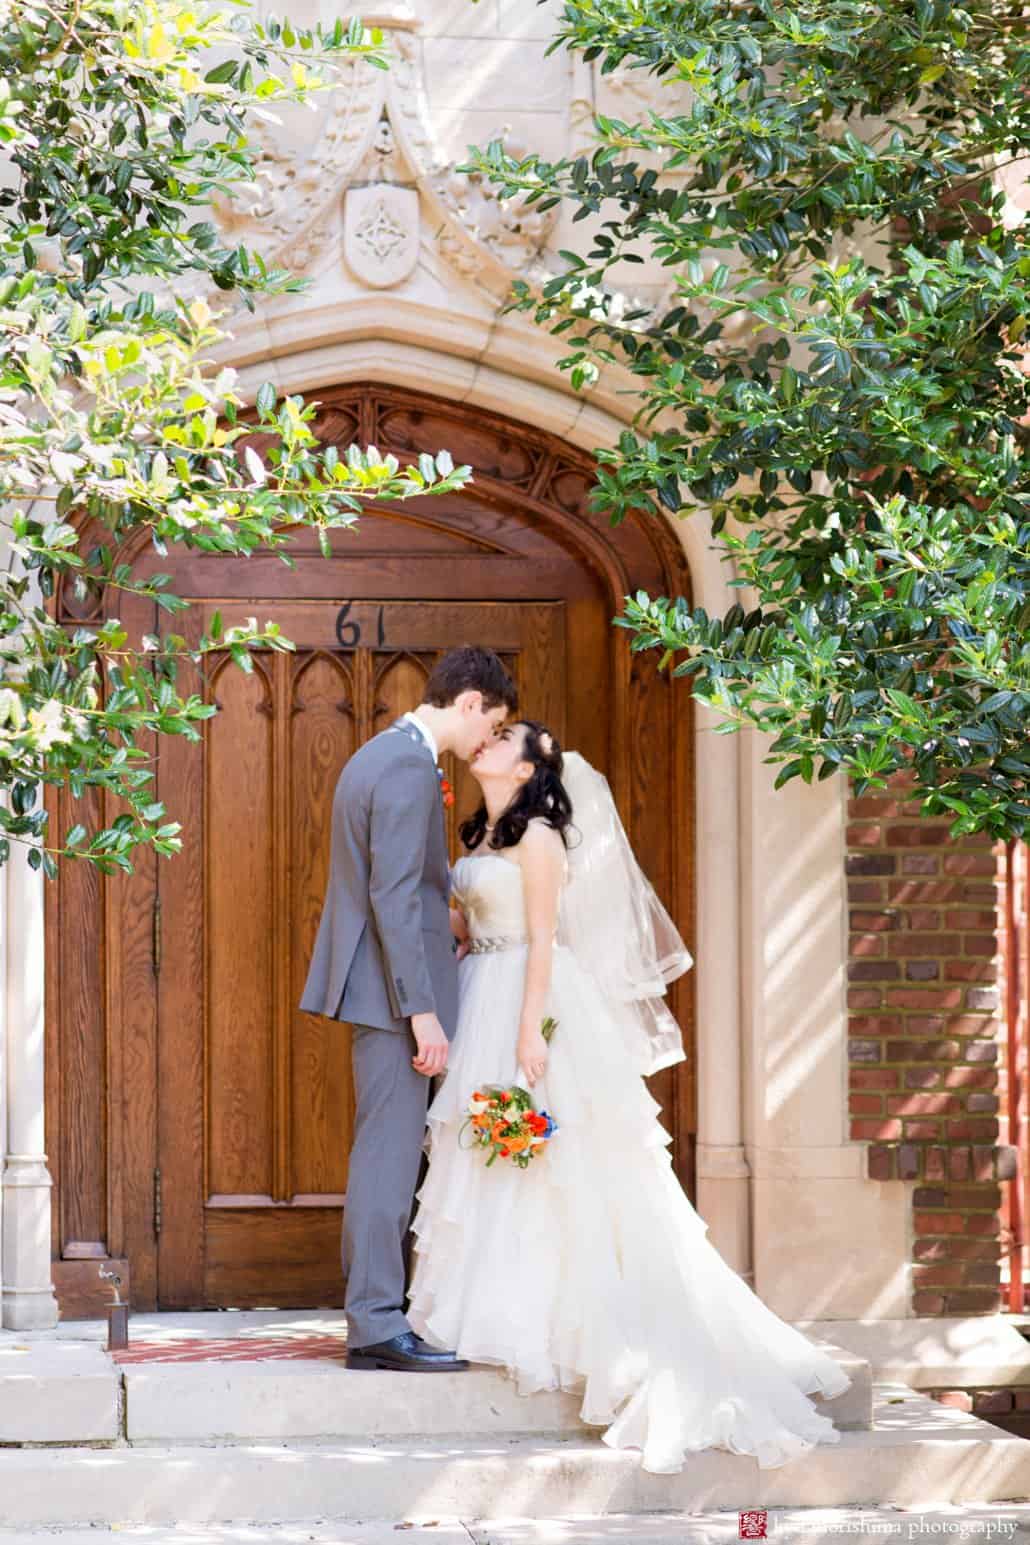 Bride and groom kiss on the stone steps in front of old wooden door during Cap and Gown Club wedding portrait session photographed by Princeton wedding photographer Kyo Morishima